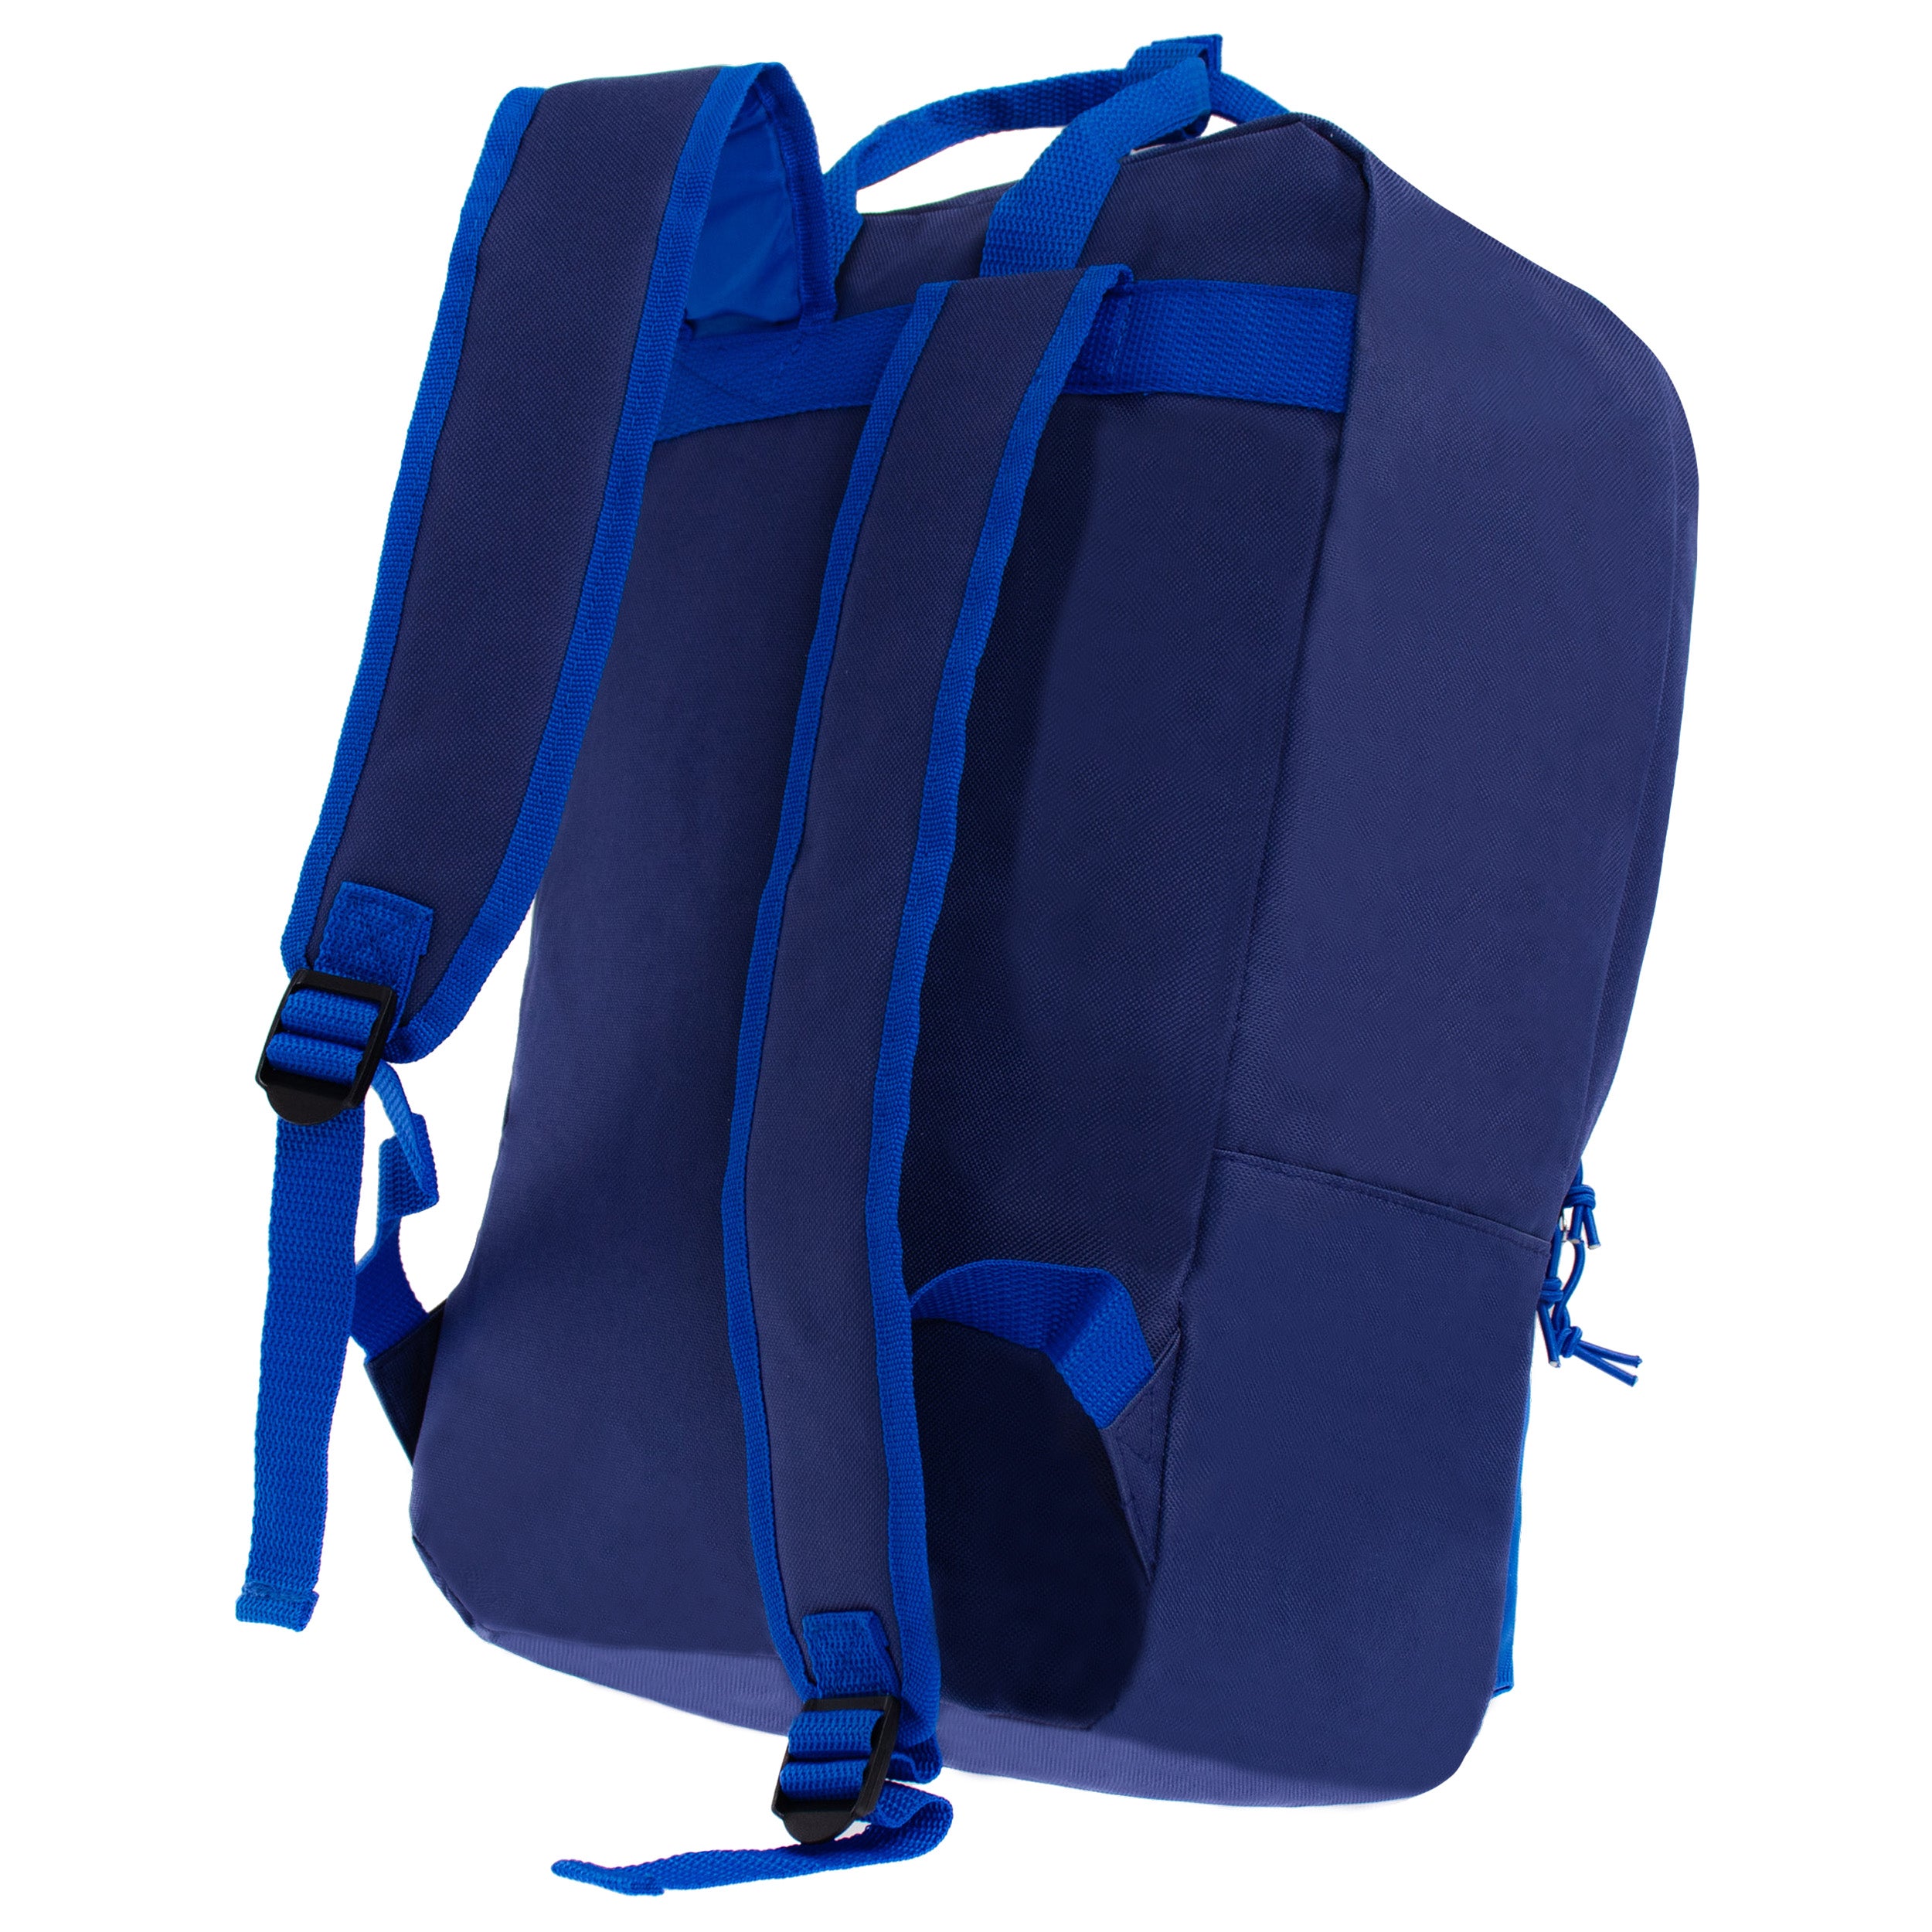 17" Wholesale Backpack with Handles in 5 Assorted Colors - Bulk Case of 24